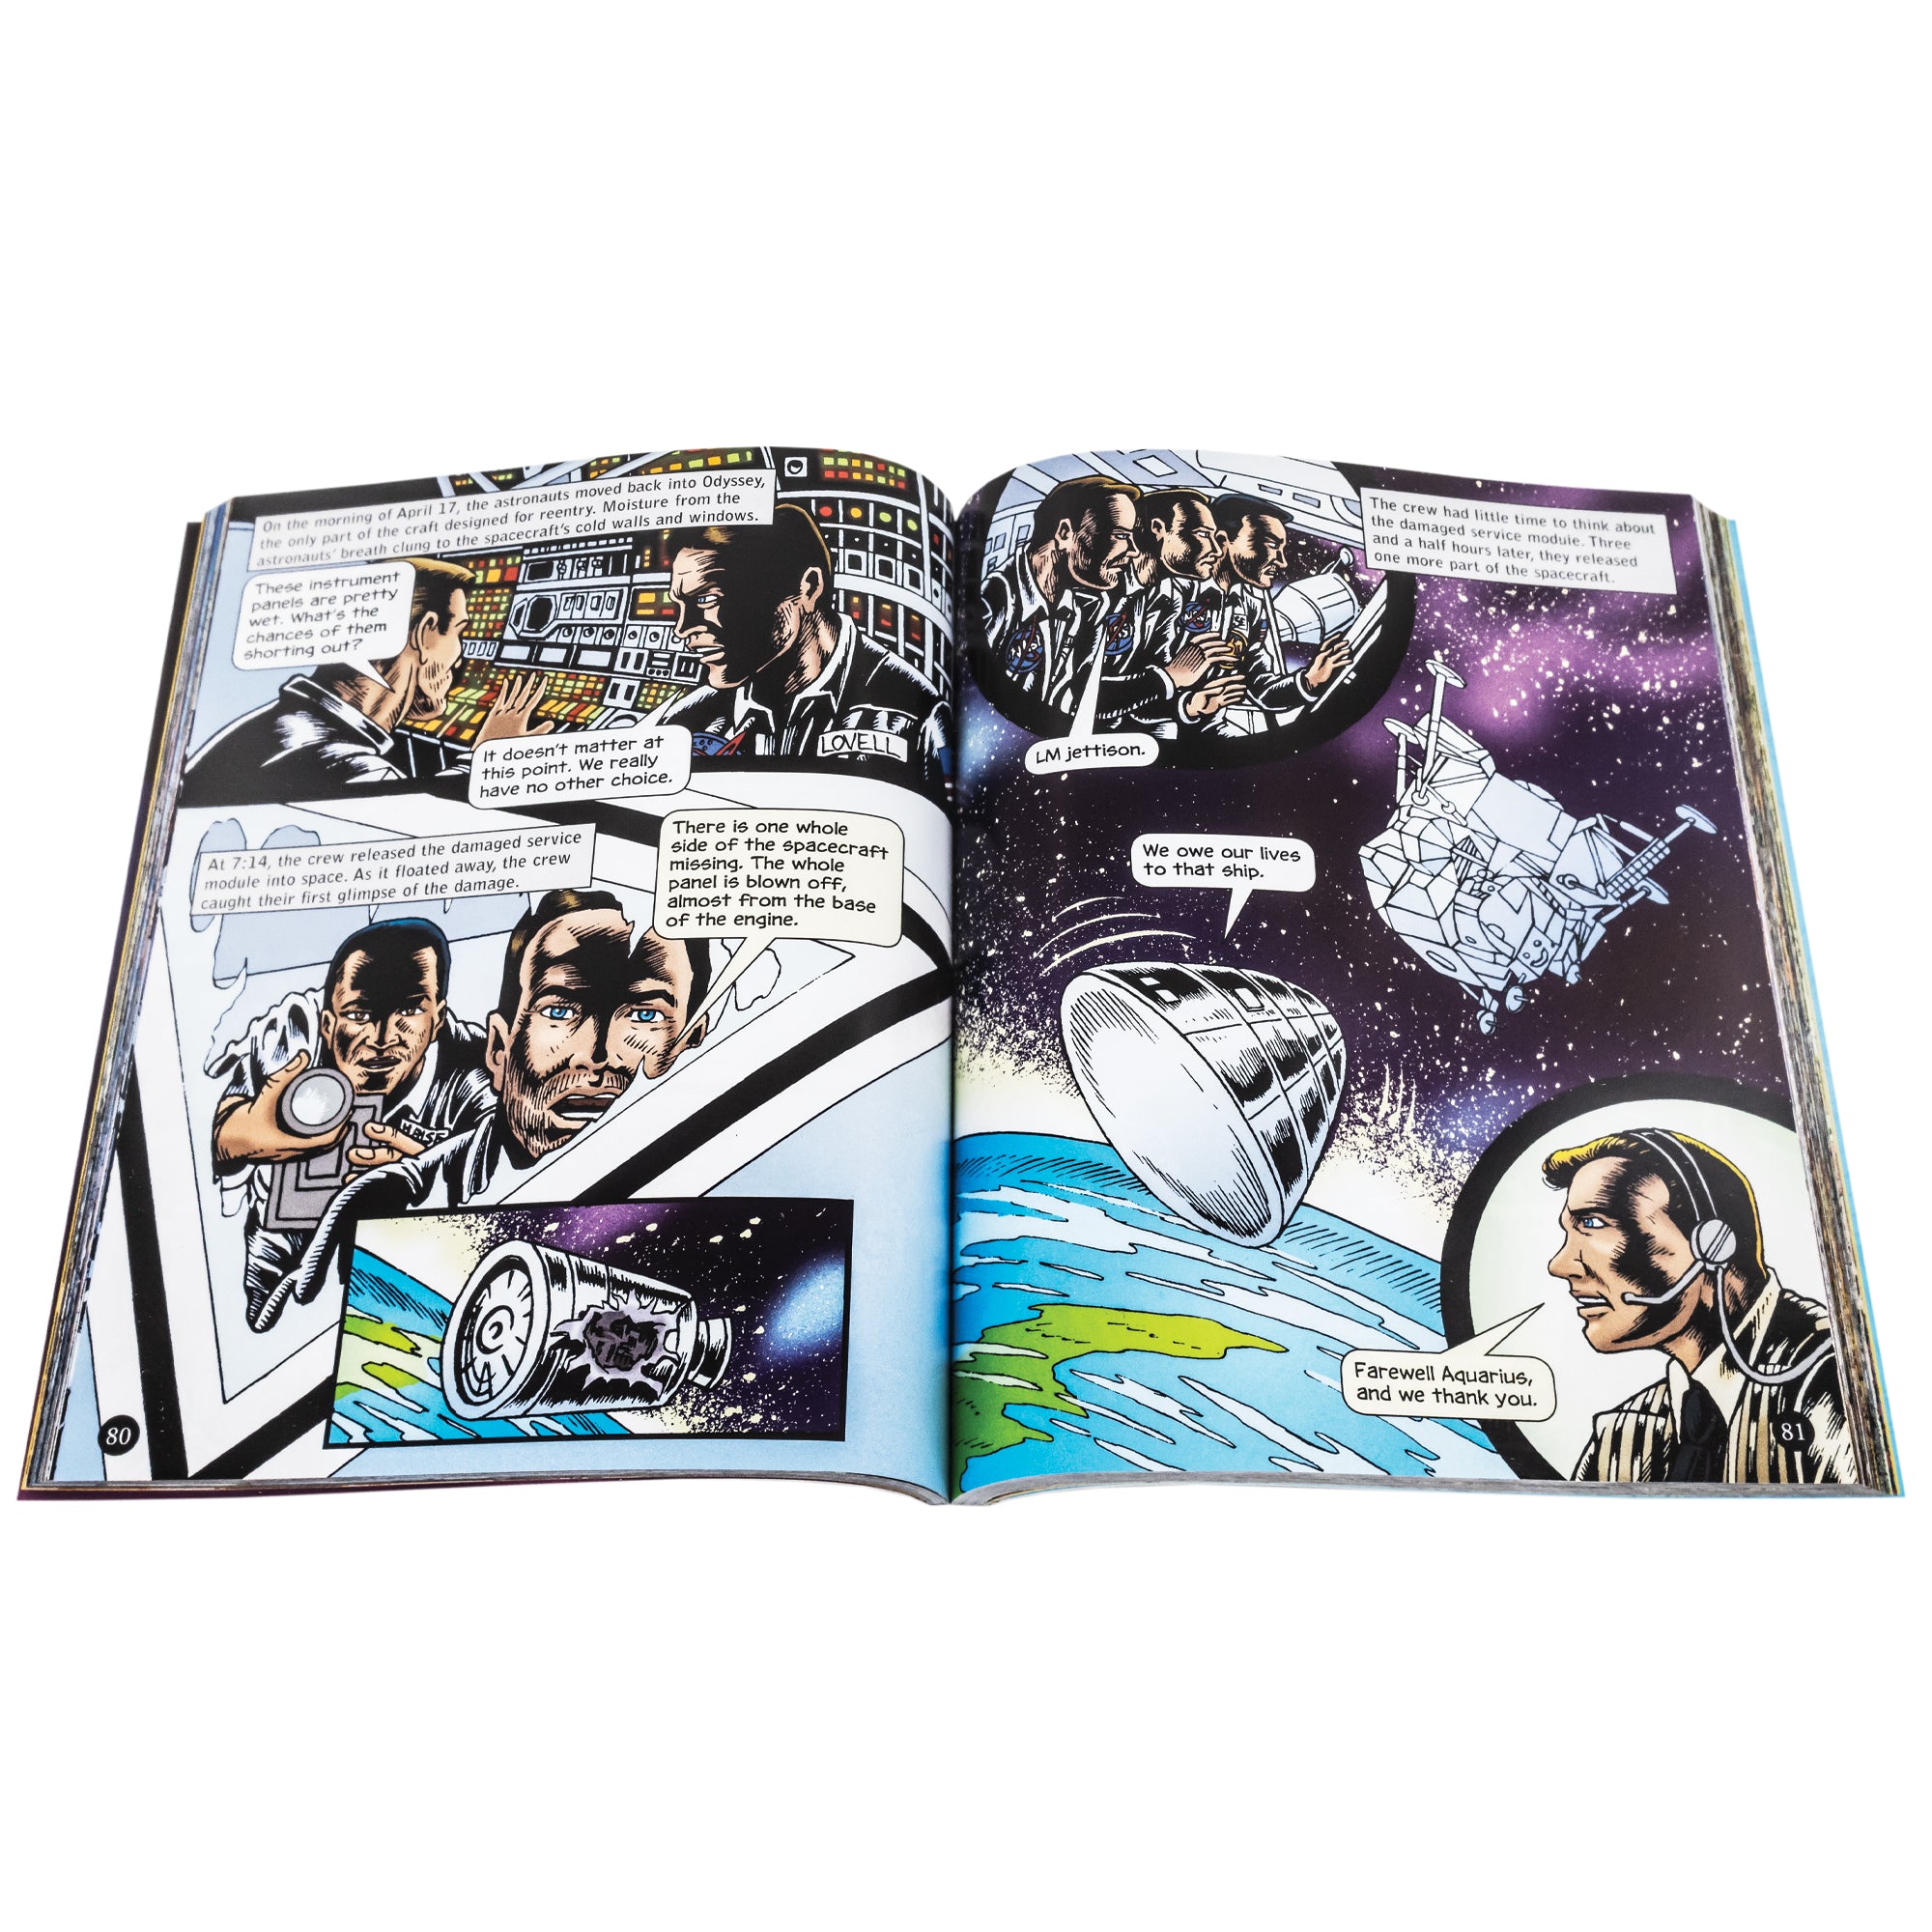 Disasters in History, a graphic novel collection open to show inside pages. The pages show the Apollo 13 disaster. As the astronauts move into the Odyssey, they see the damage done to the service module. It shows a large hole exploded in the side. They release another part of the ship and head home. The book is a comic book style layout with squared illustrations and talk bubbles.